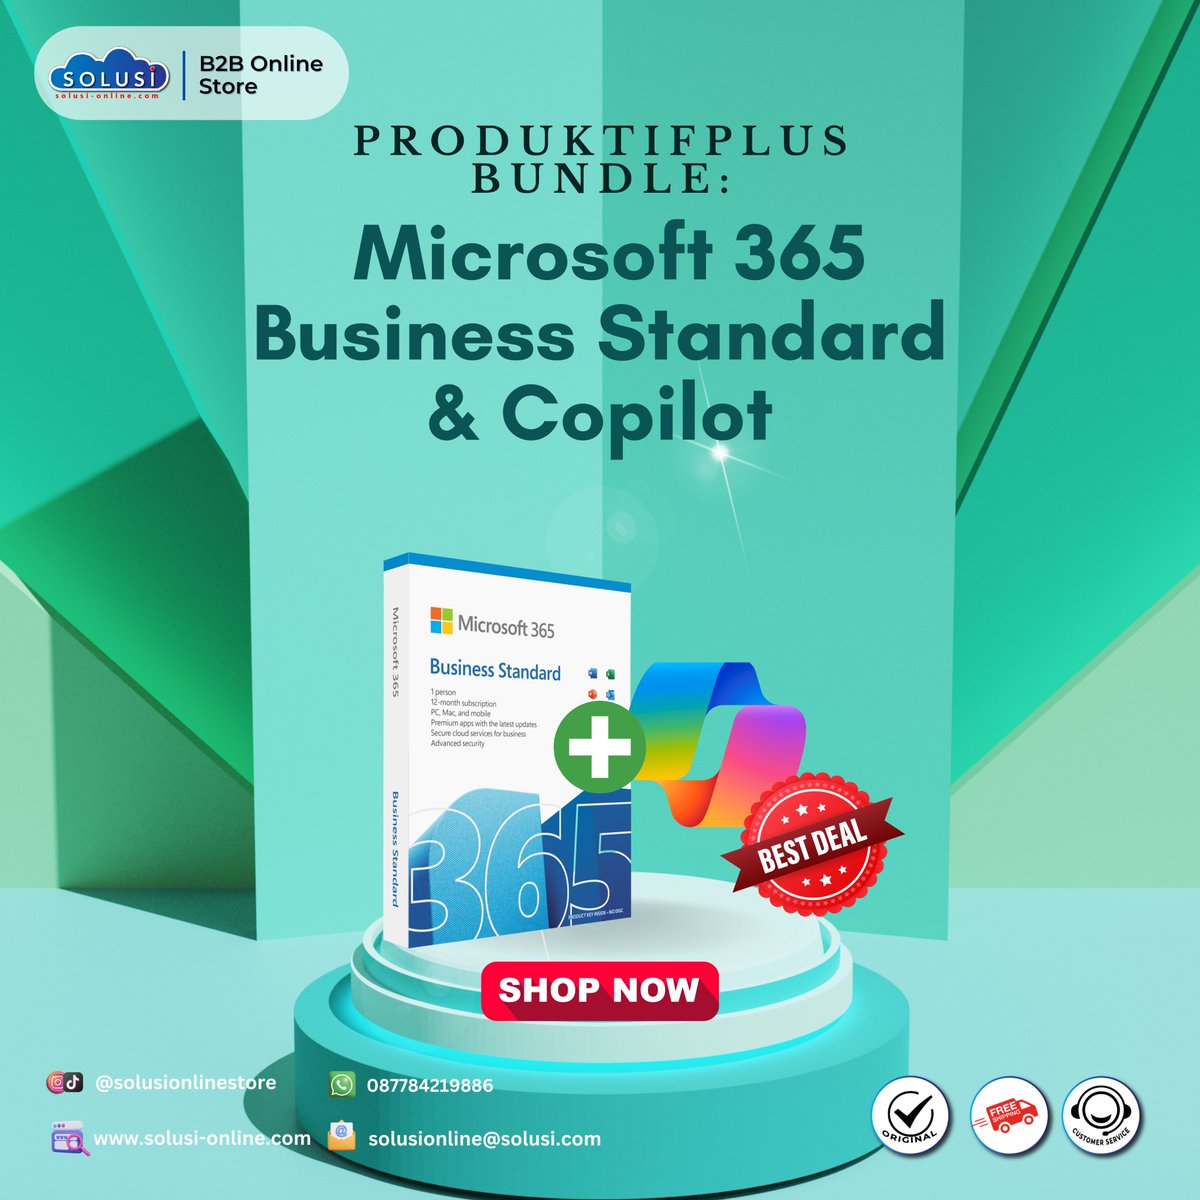 Optimizing productivity and savings with the ultimate duo: Microsoft 365 Business Standard and Copilot bundling! 💼💻 

Shop Now: solusi-online.com/product/produk…

#Efficiency #SmartSavings #TechSynergy #Diskon #Murah #Cloud #License #Software #SolusiOnlineStore #B2BOnlineStore